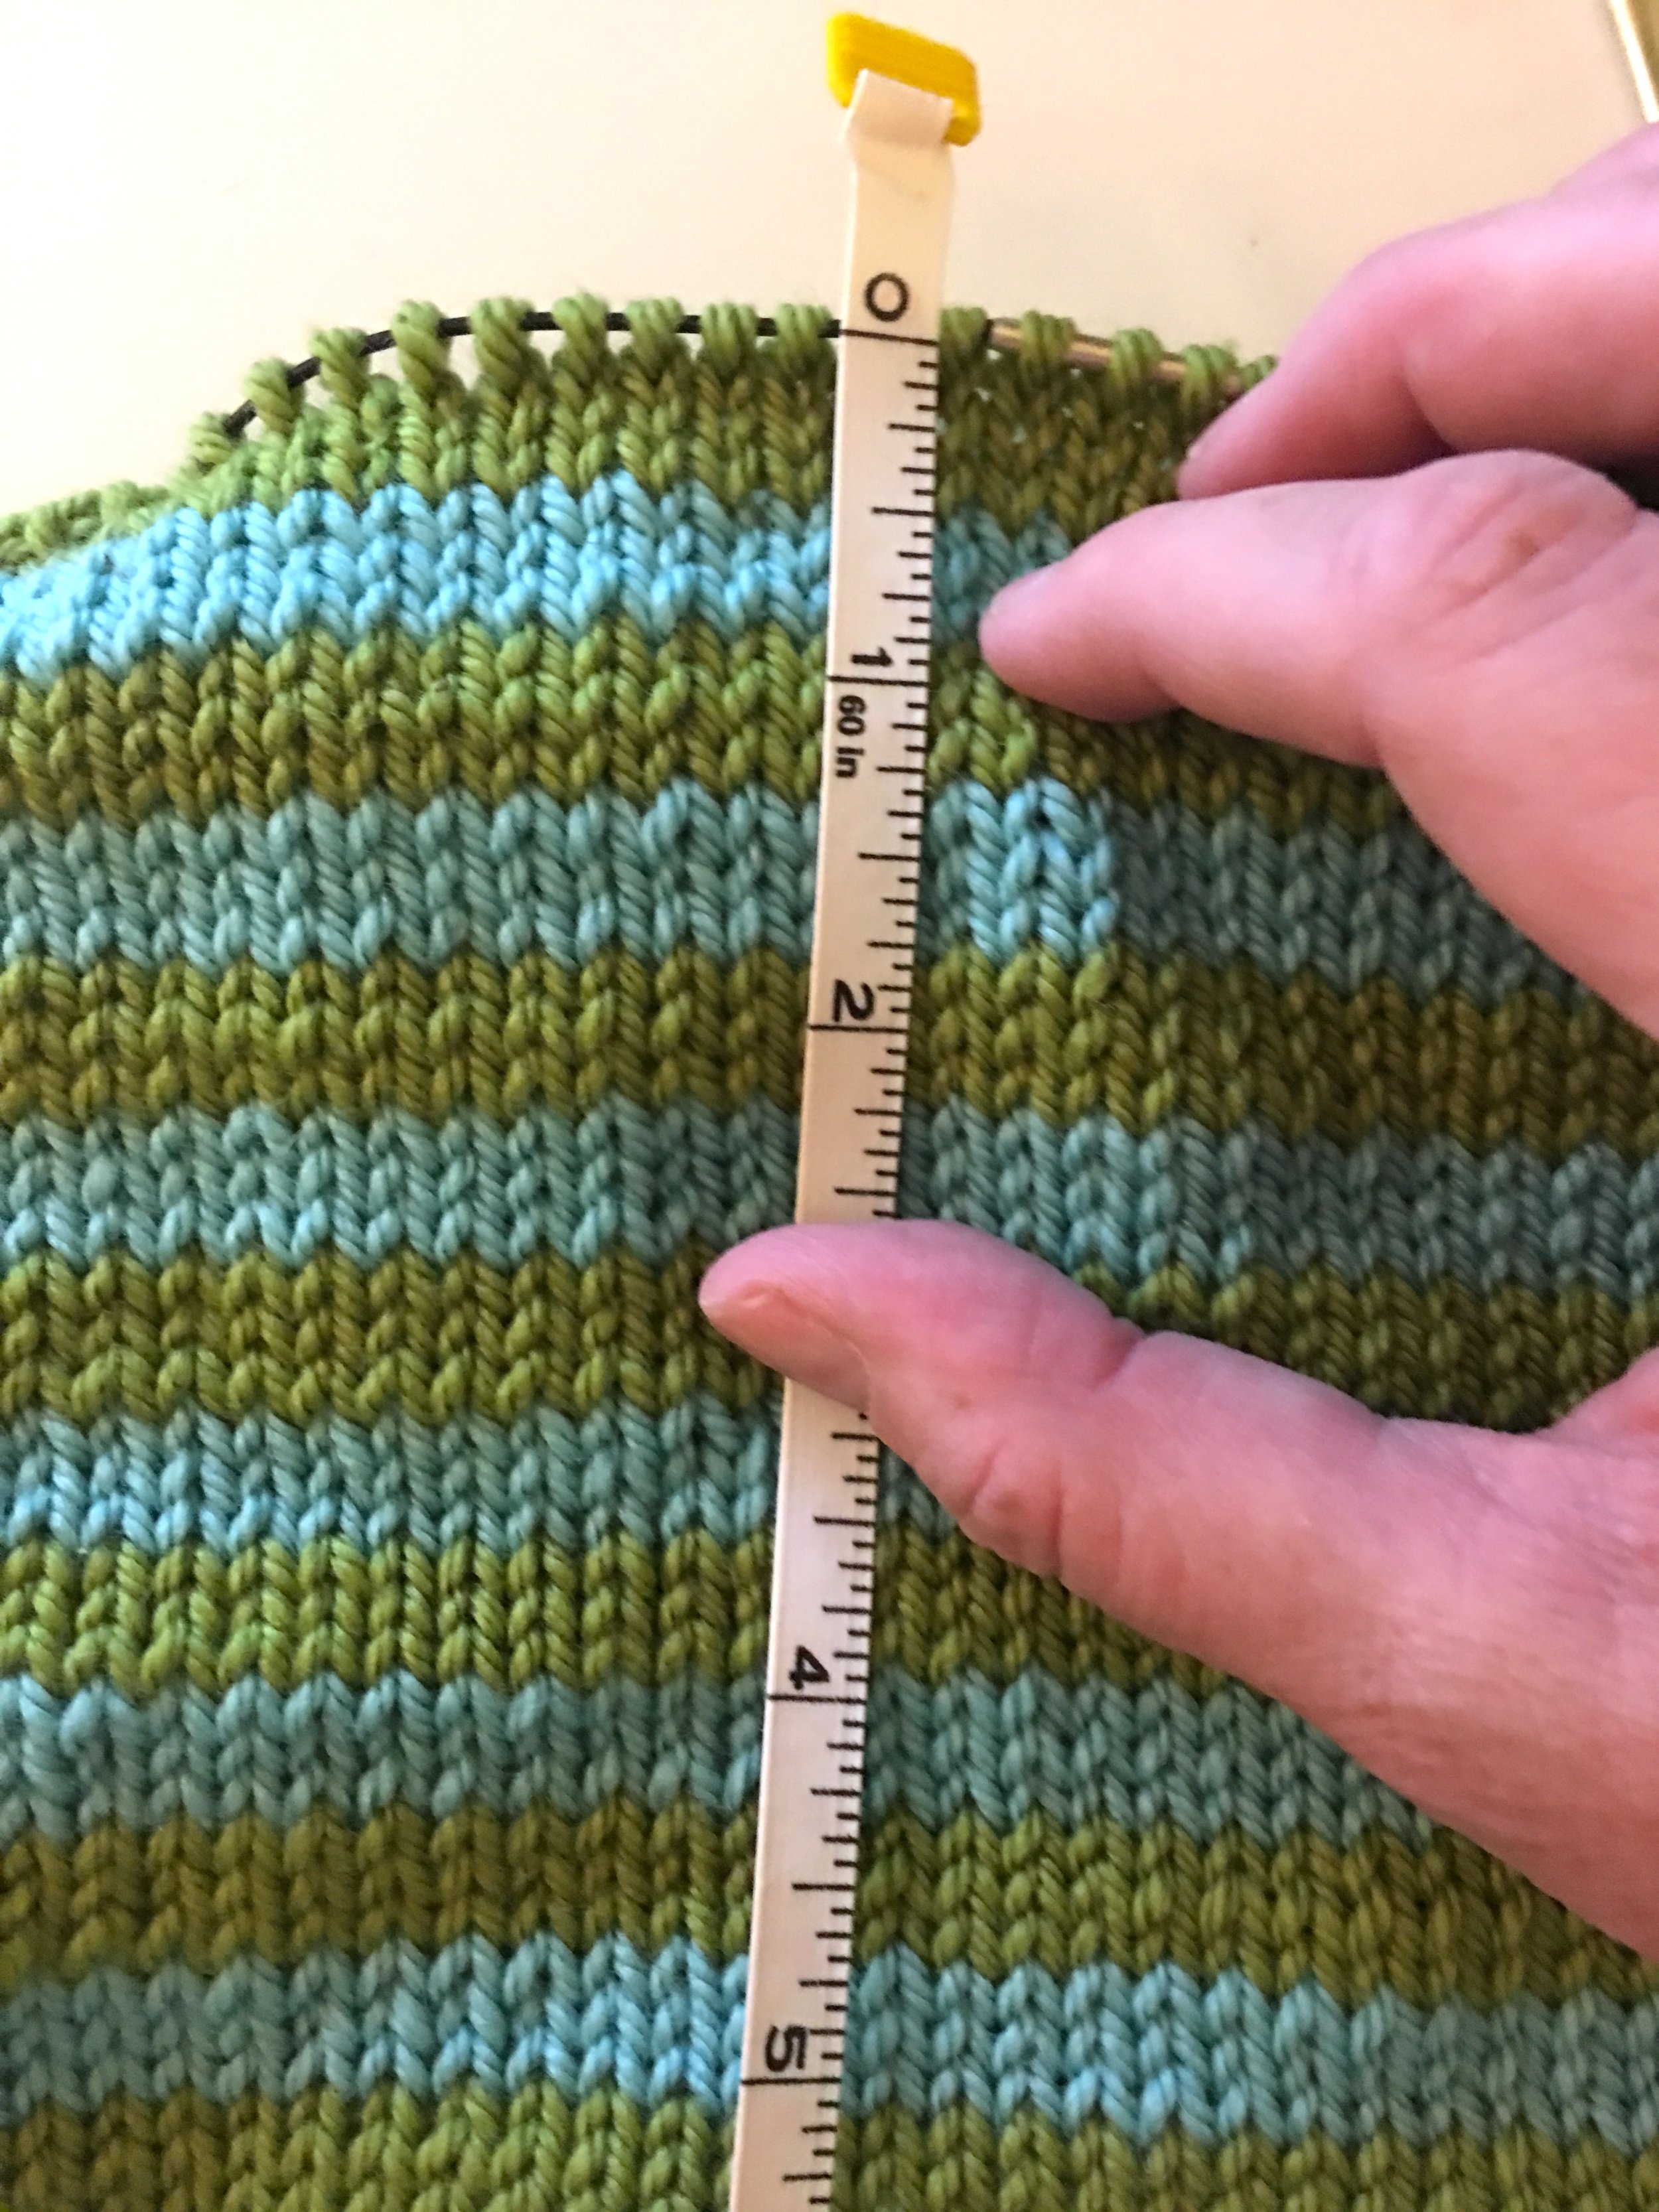 How to Measure Knitting Length